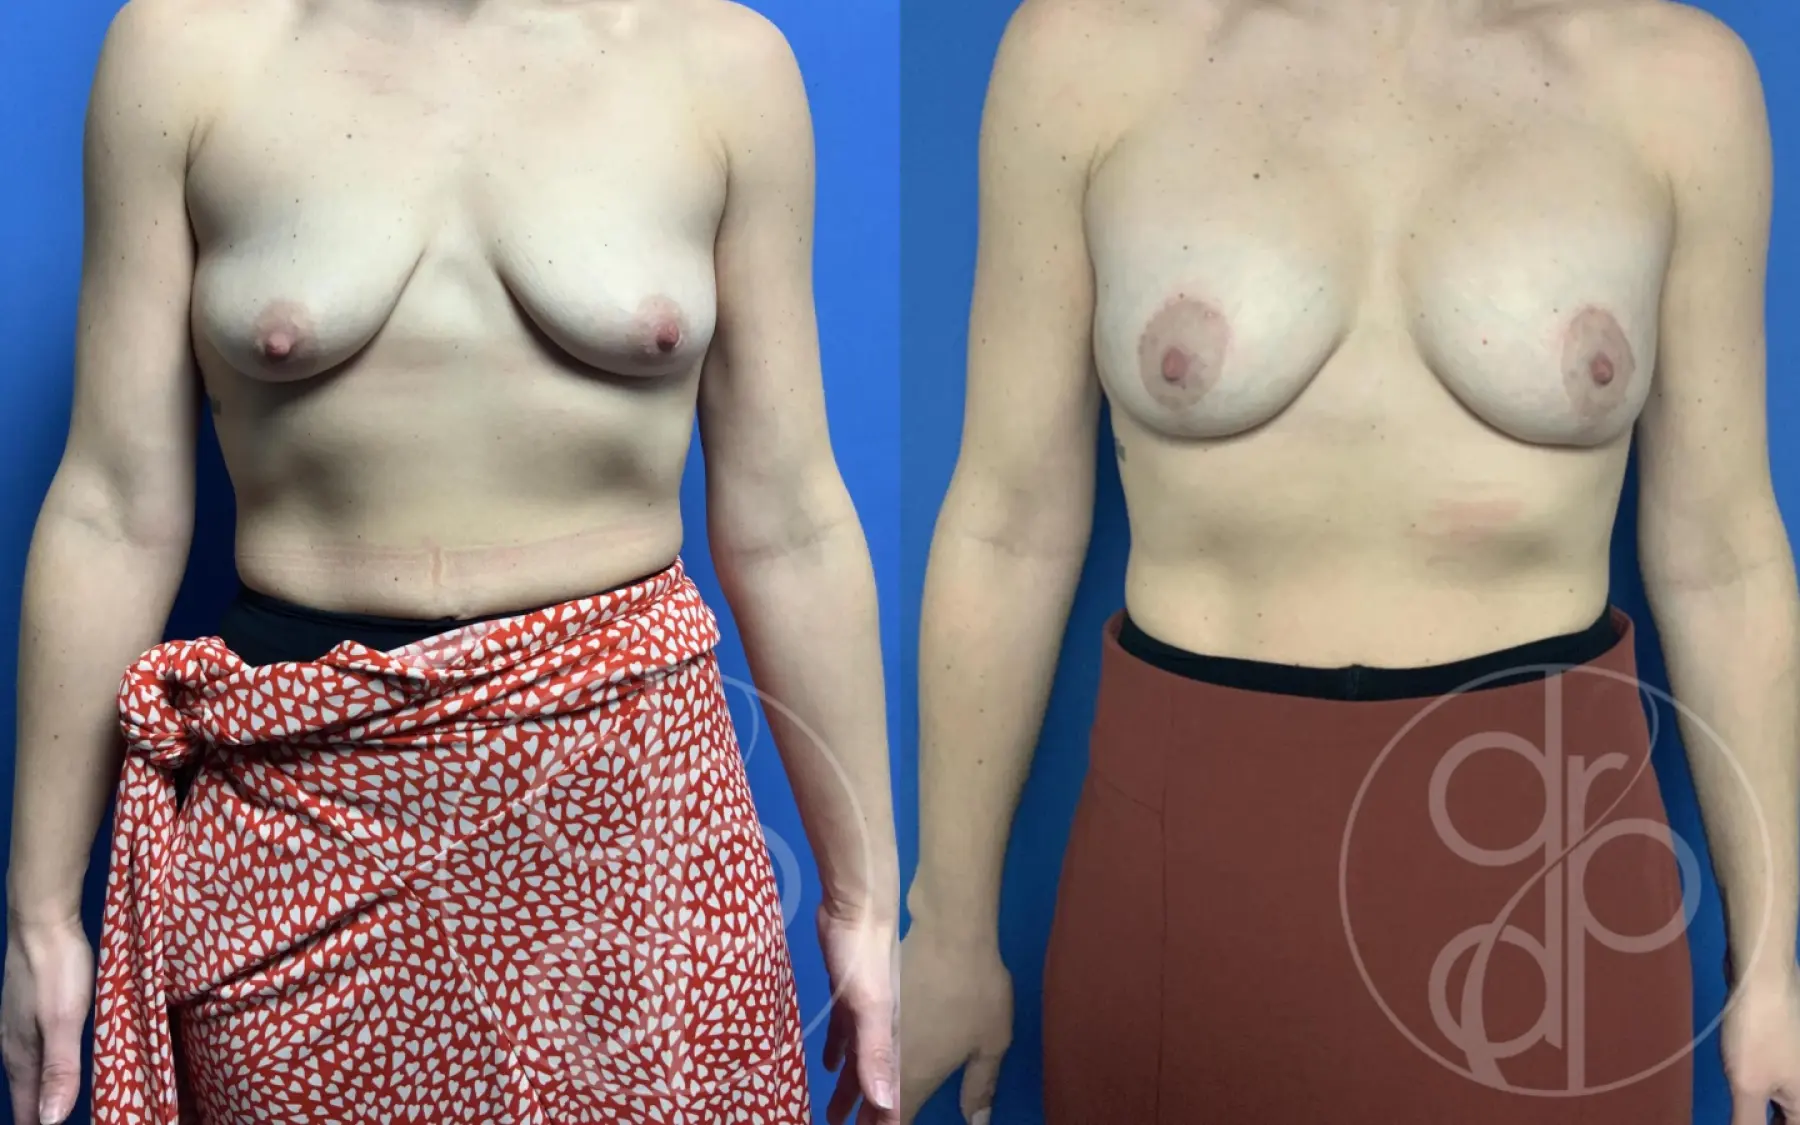 Breast Augmentation With Lift: Patient 2 - Before and After  